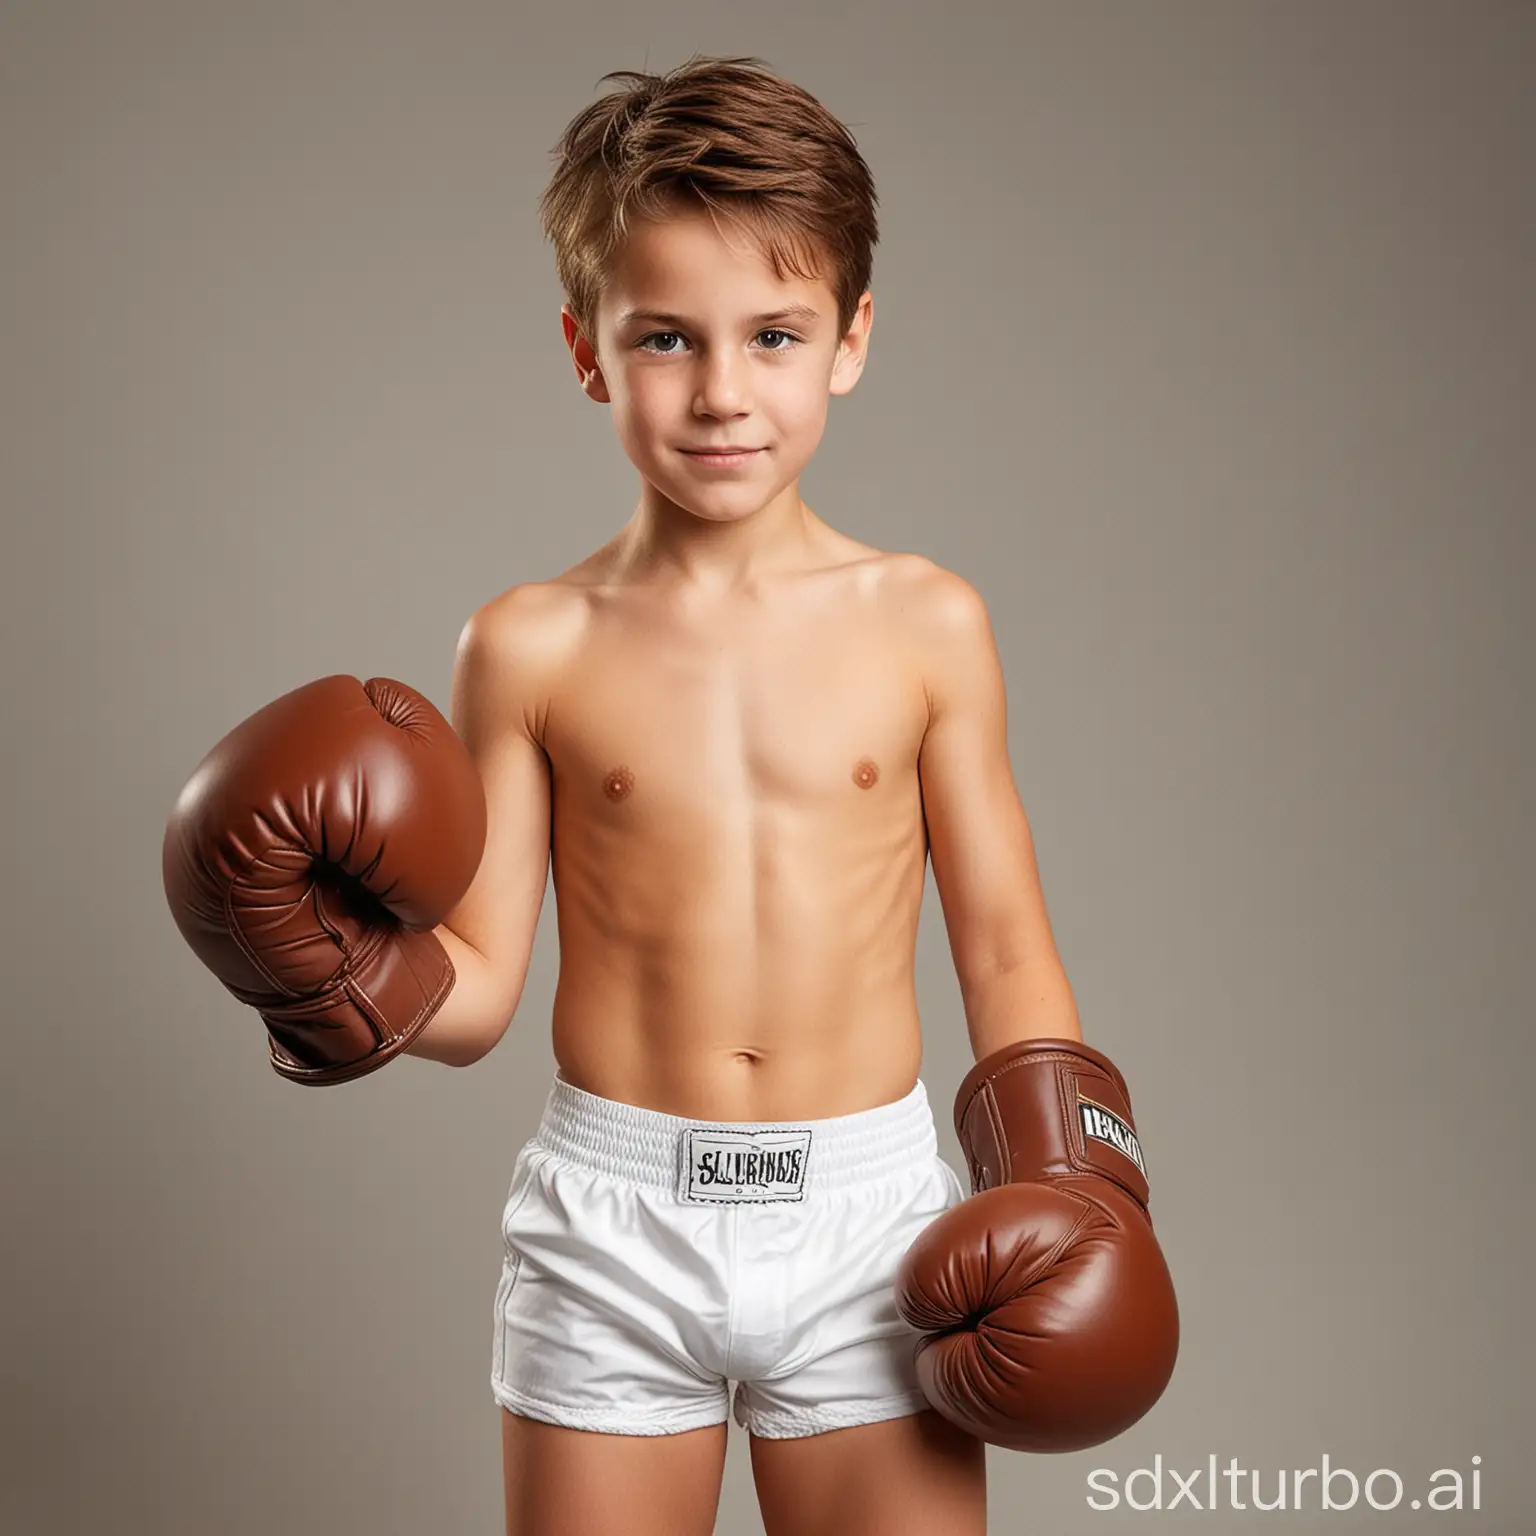 young shirtless boy wearing white trunks and large brown boxing gloves